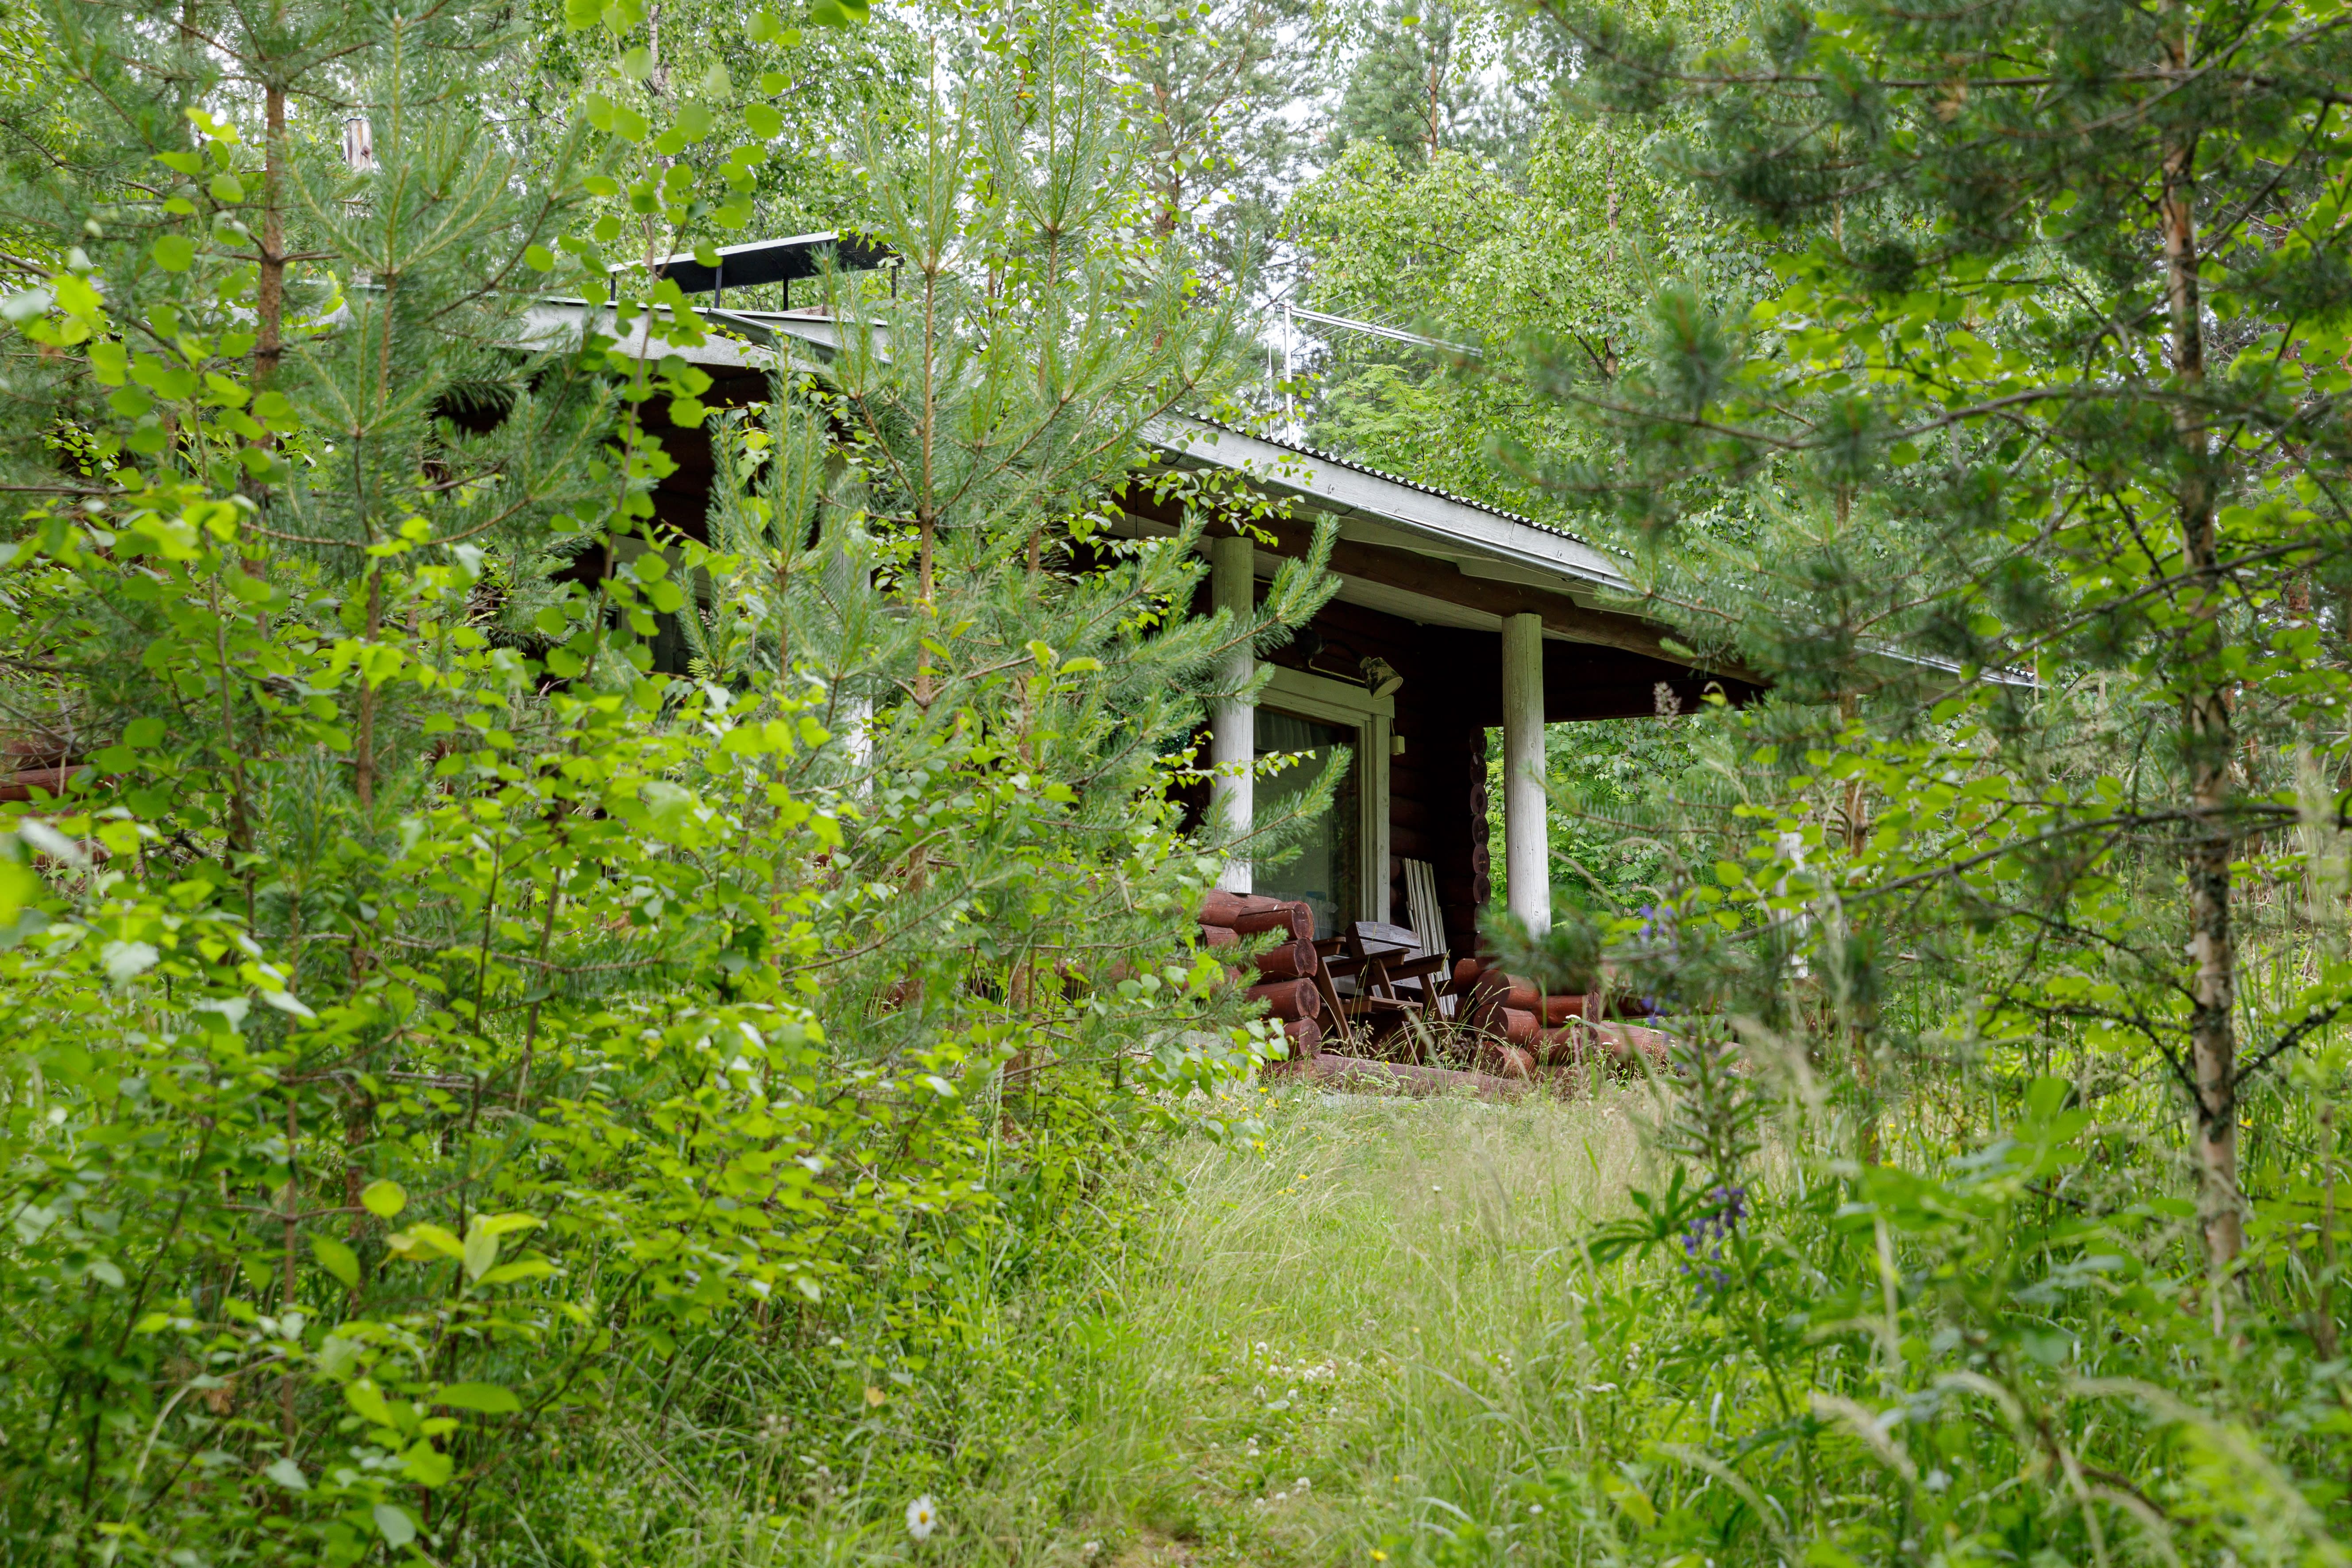 The price of summer cottages varies greatly in different parts of Finland